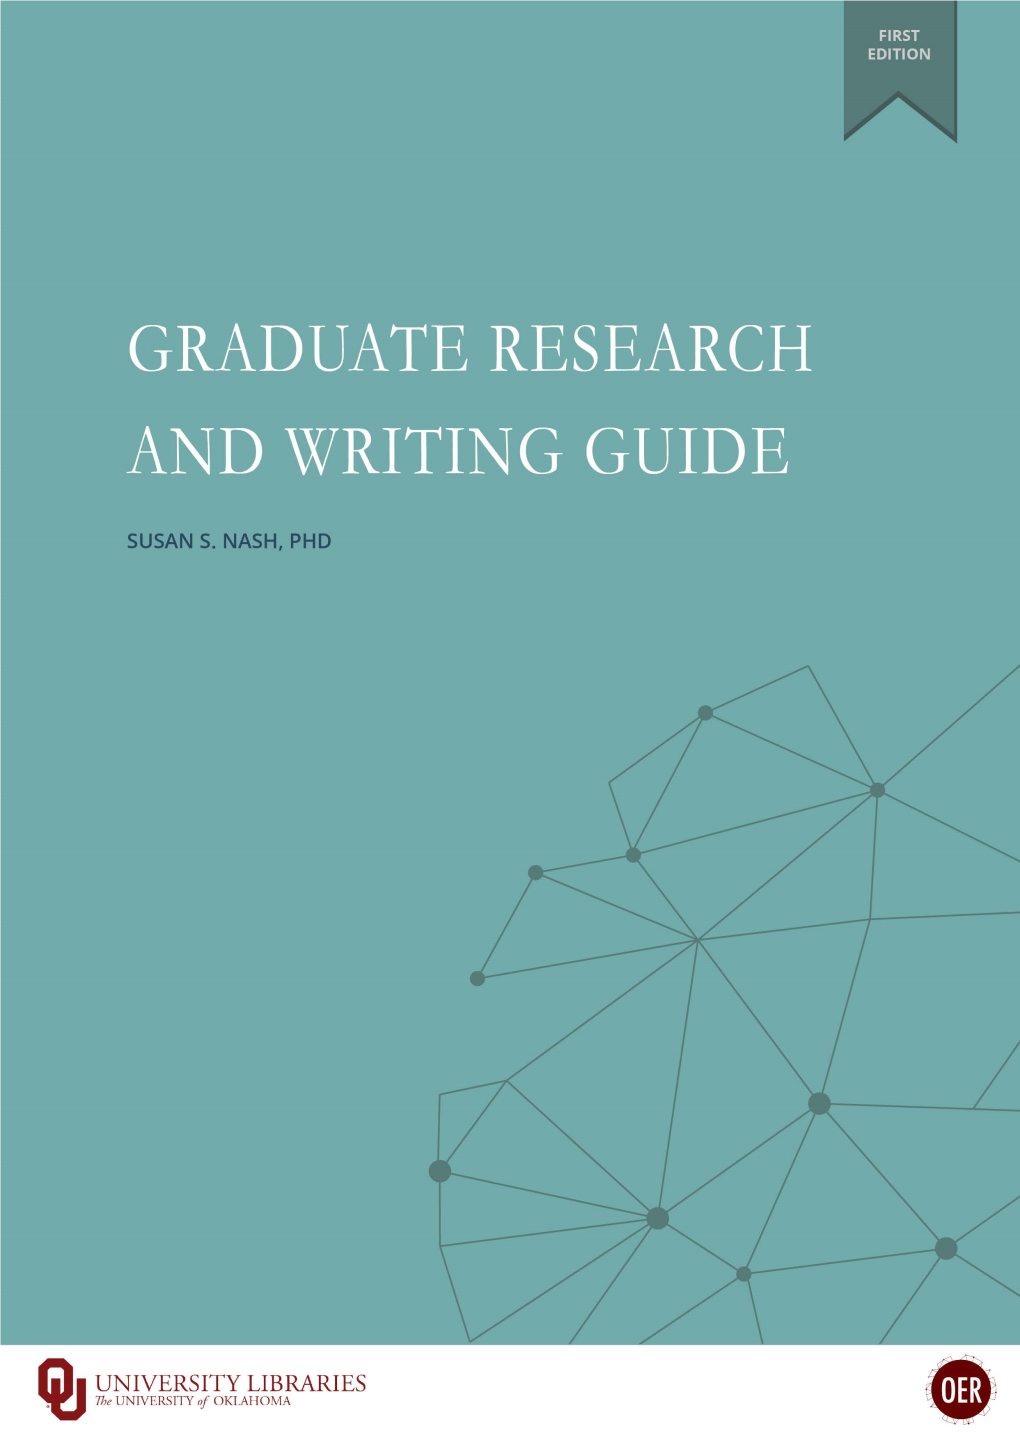 Graduate Research and Writing Guide (PDF) (994.9Kb)